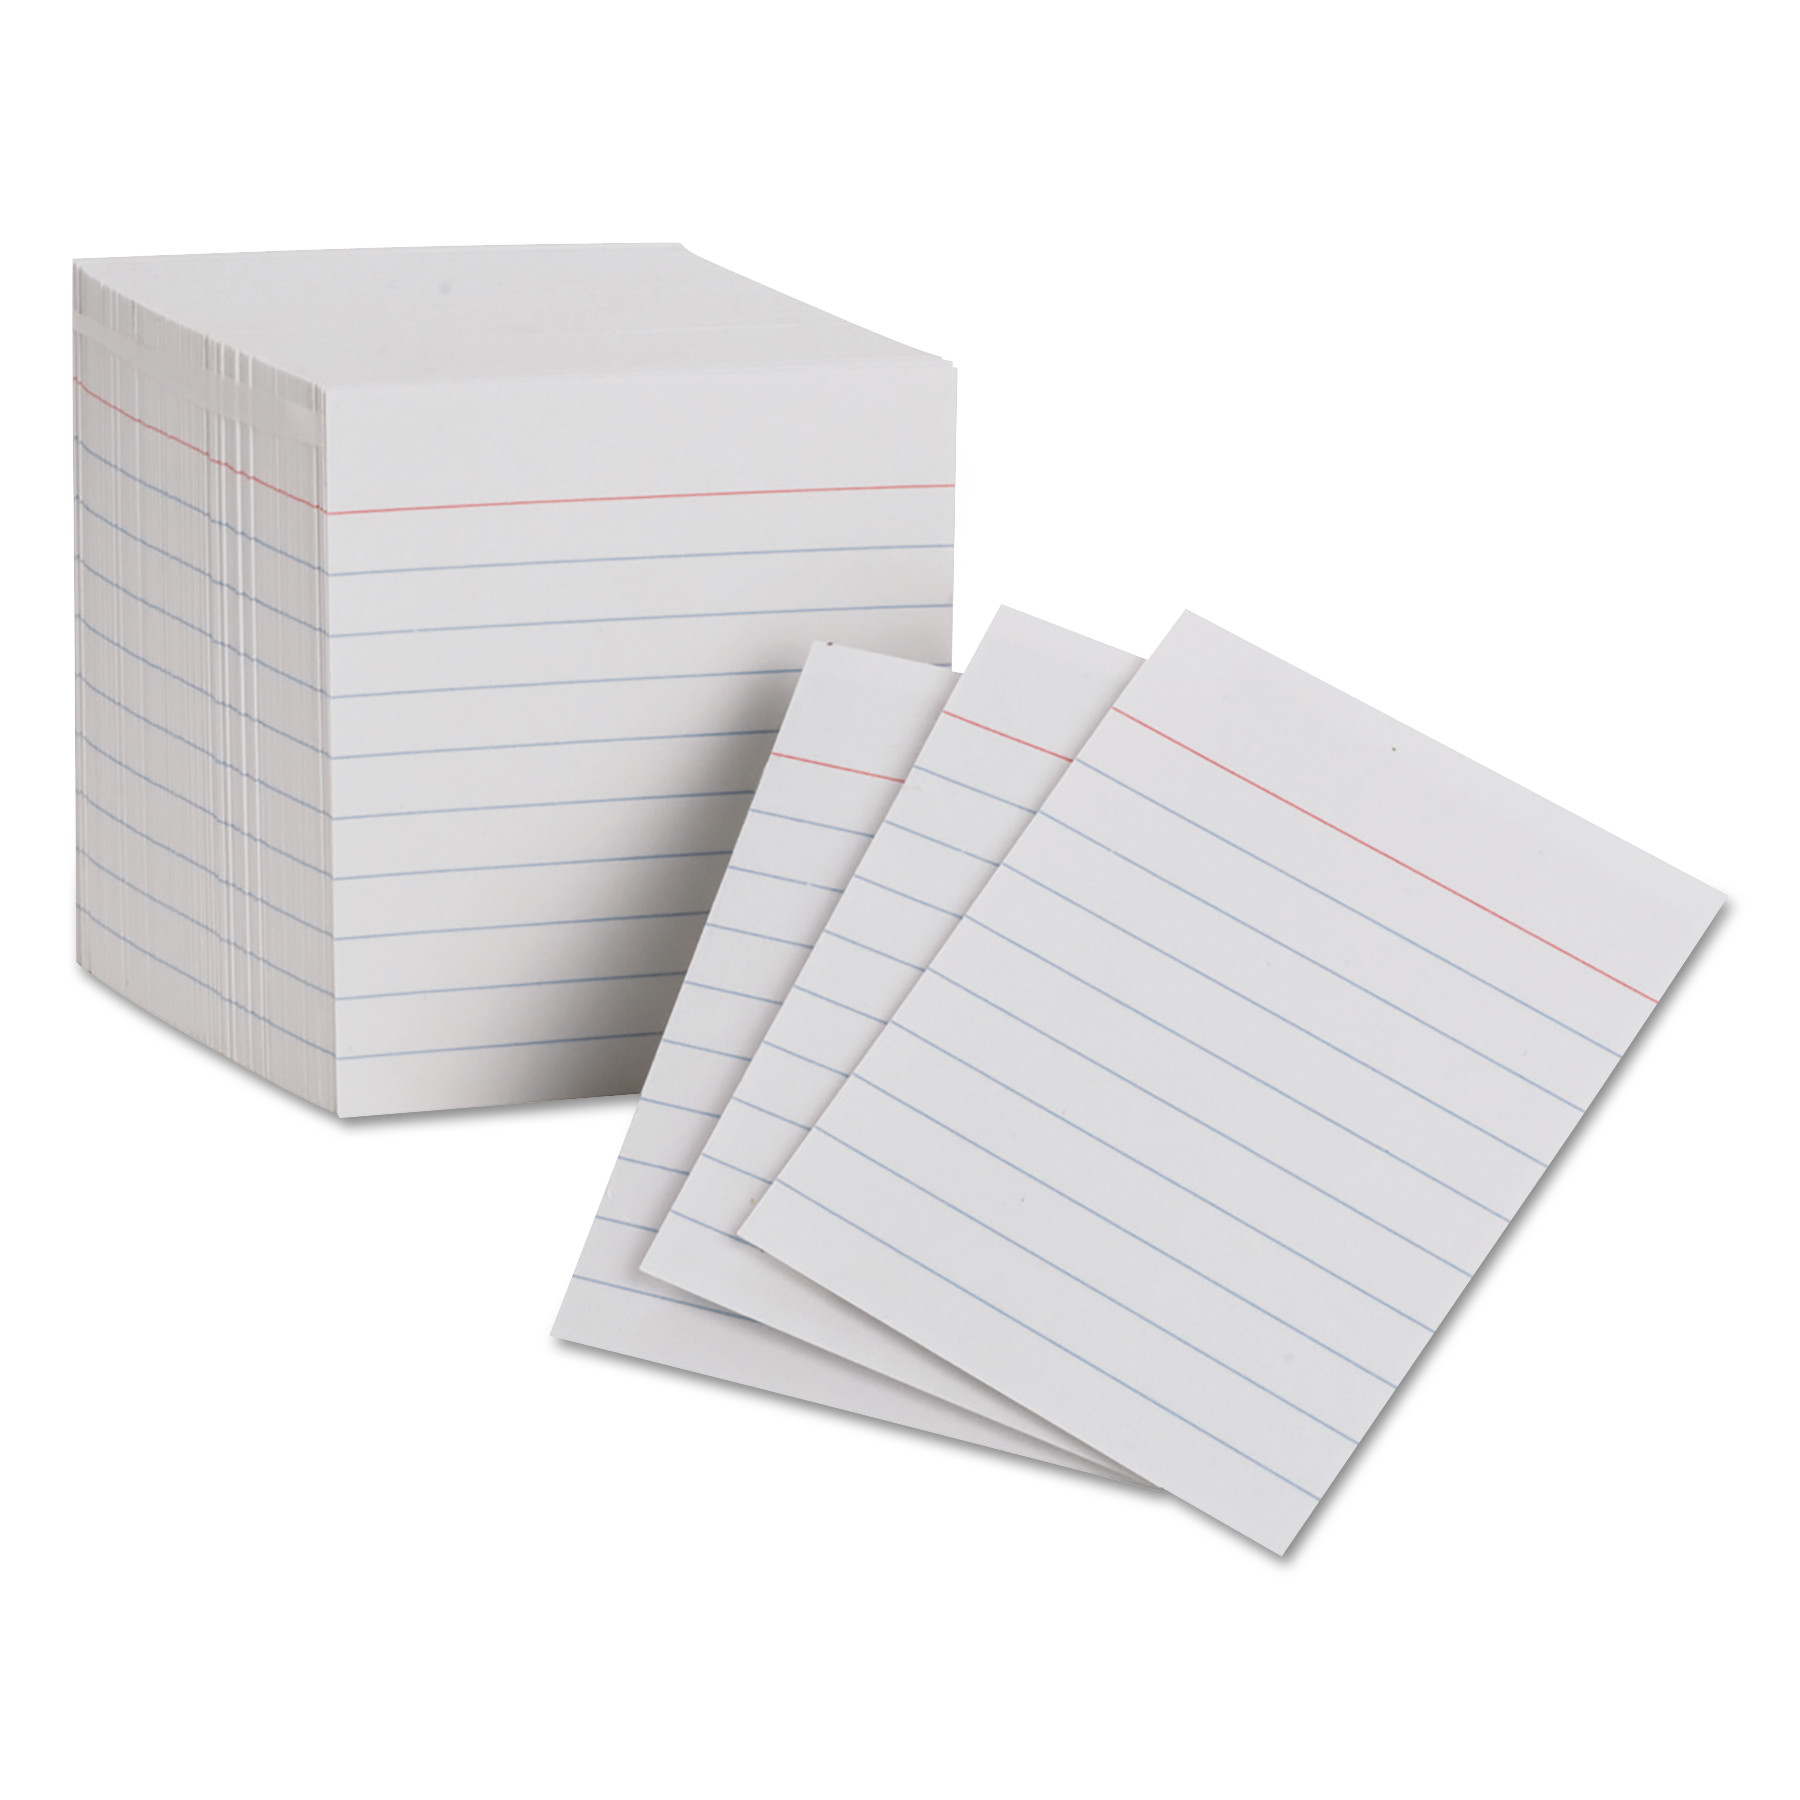  Oxford 10009EE Ruled Mini Index Cards, 3 x 2 1/2, White, 200/Pack (PFX10009) 